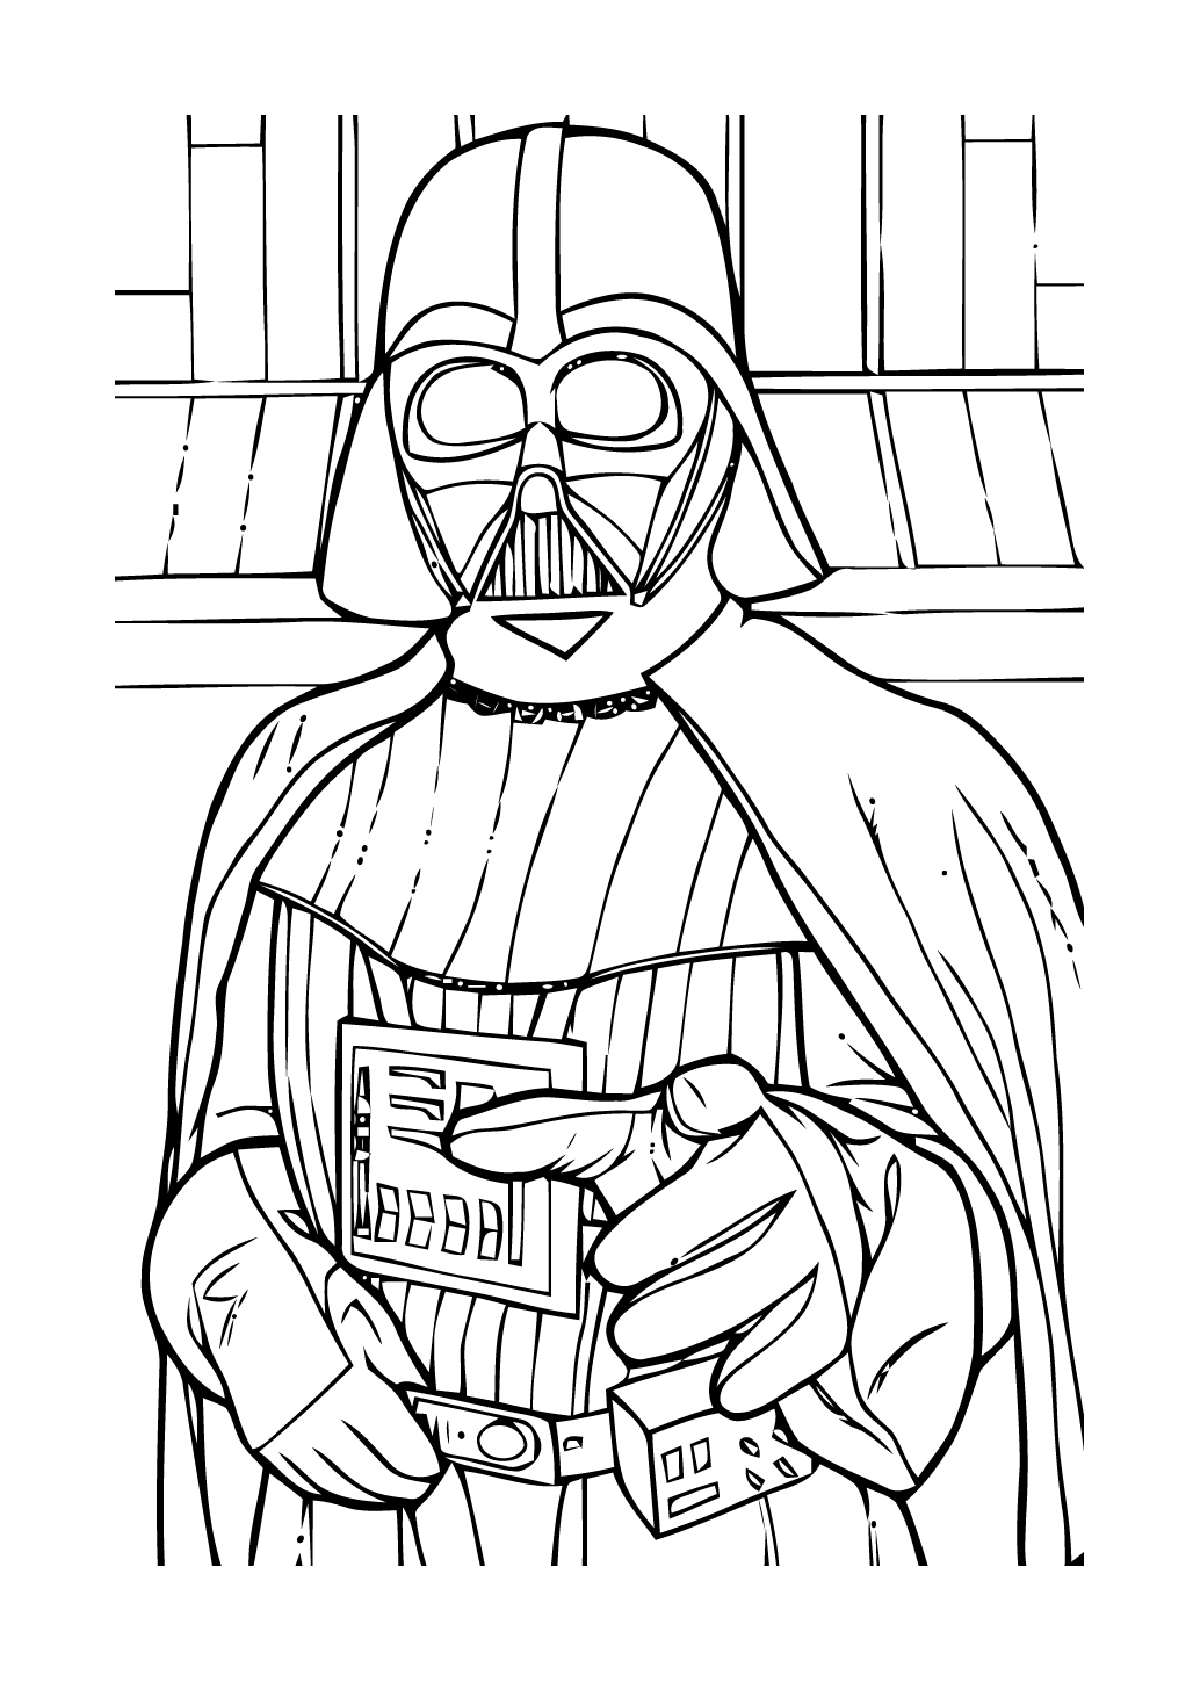 Star Wars coloring page with few details for kids